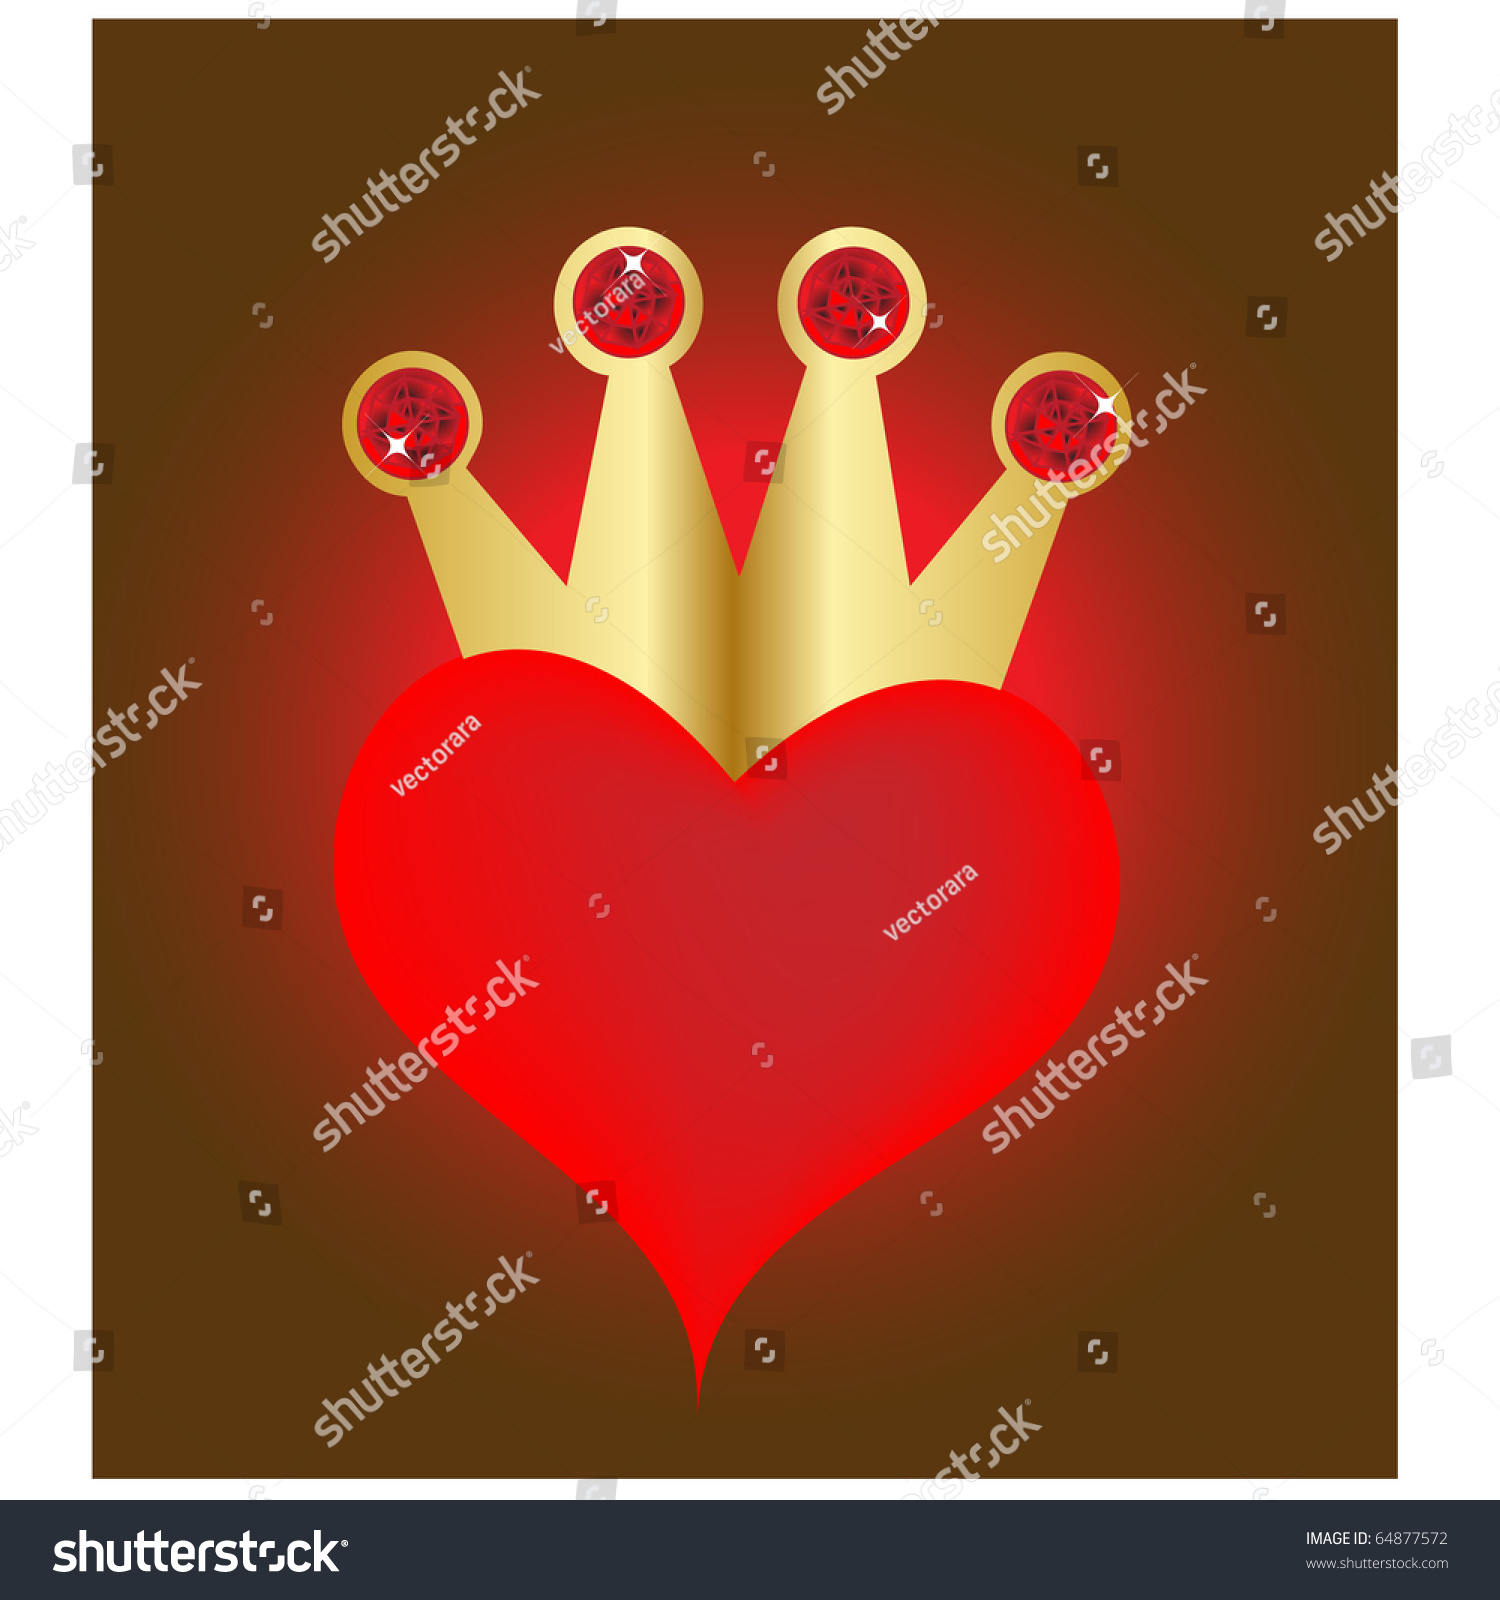 Heart With Crown.Vector - 64877572 : Shutterstock